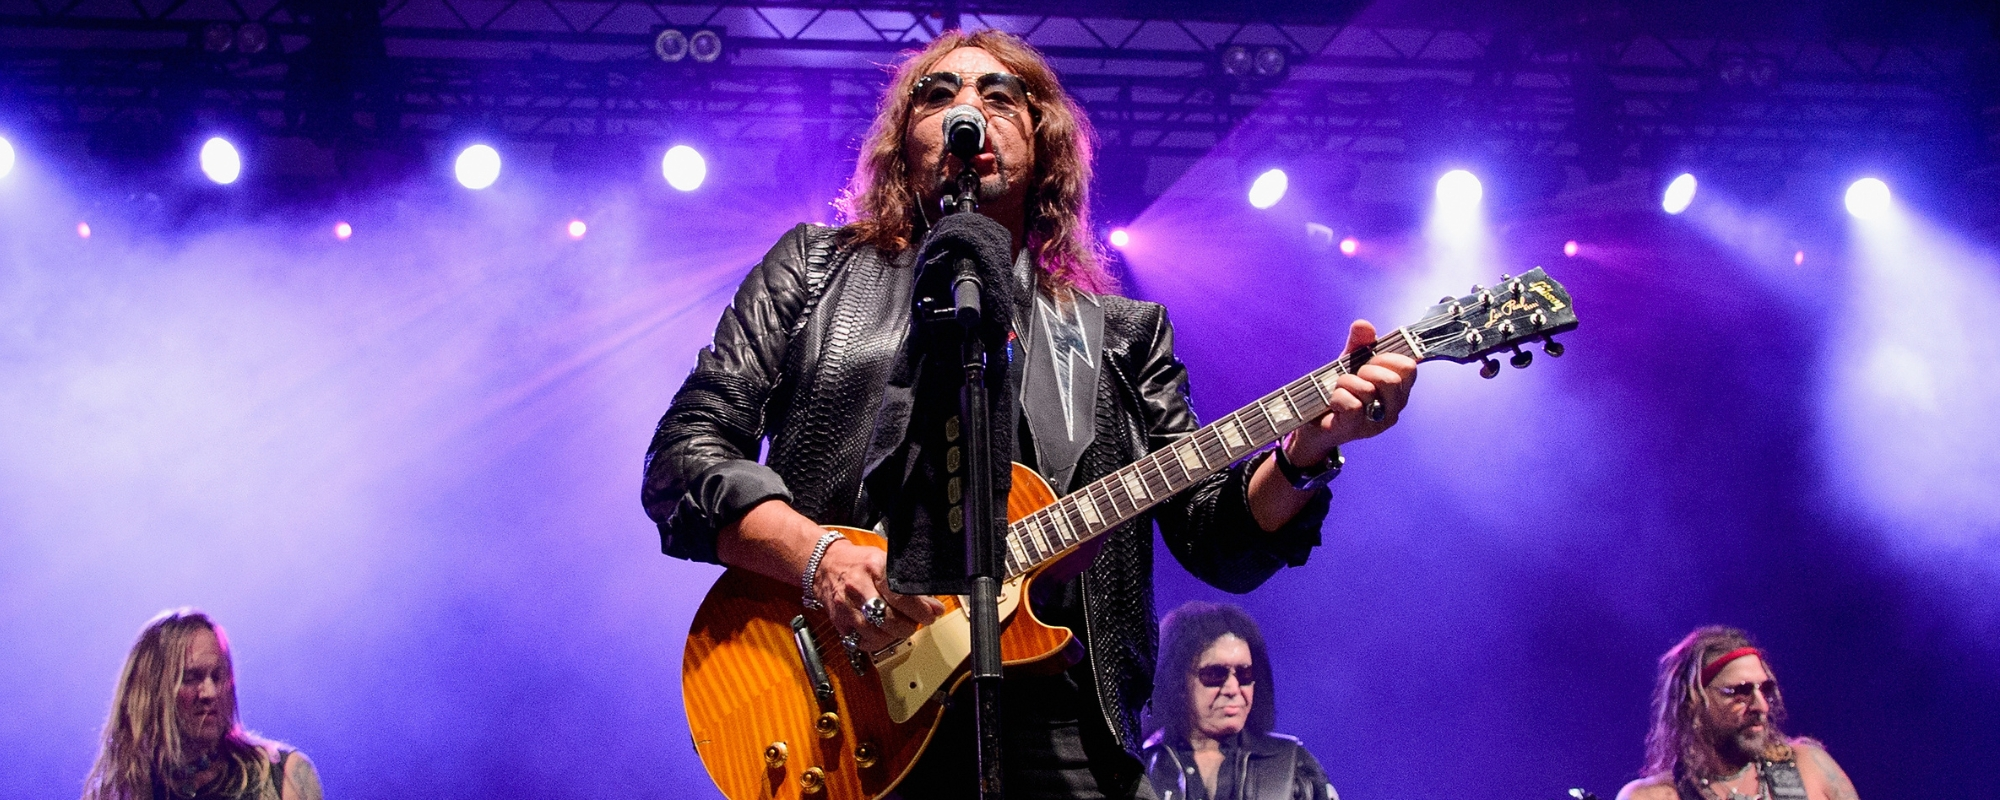 Ace Frehley Says He Won’t Appear at KISS’ Final Show; Announces New Solo Album, ‘10,000 Volts’